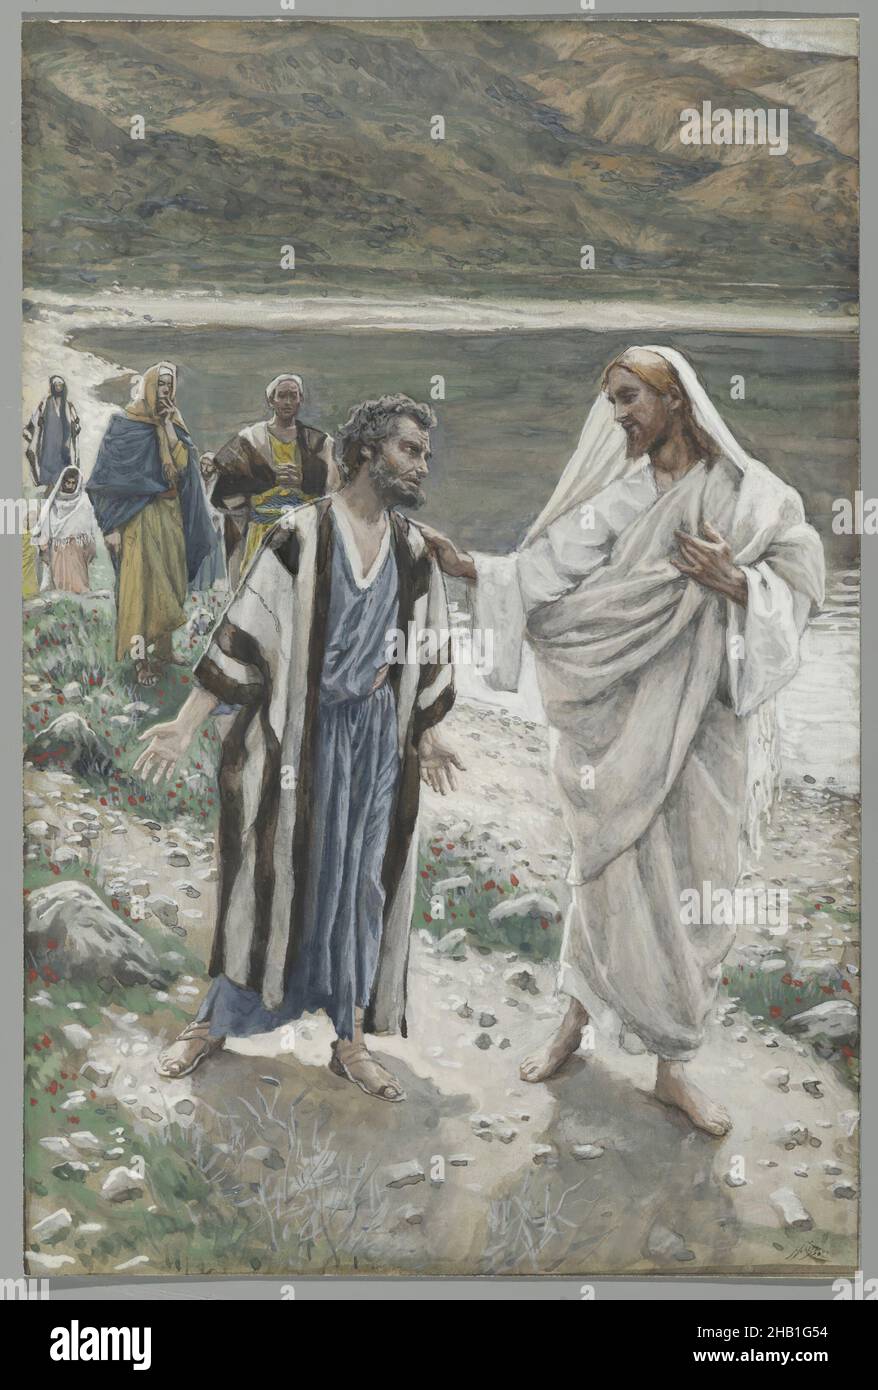 Feed My Lambs, Pais mes brebis, The Life of Our Lord Jesus Christ, La Vie de Notre-Seigneur Jésus-Christ, James Tissot, French, 1836-1902, Opaque watercolor over graphite on gray wove paper, France, 1886-1894, Image: 9 5/8 x 6 3/8 in., 24.4 x 16.2 cm, beach, christ, Christianity, compassion, French Art, jesus, Jesus Christ, John 21:15-19, lake, landscape, male figures, men, New Testament, religious art, shore, walking, water Stock Photo